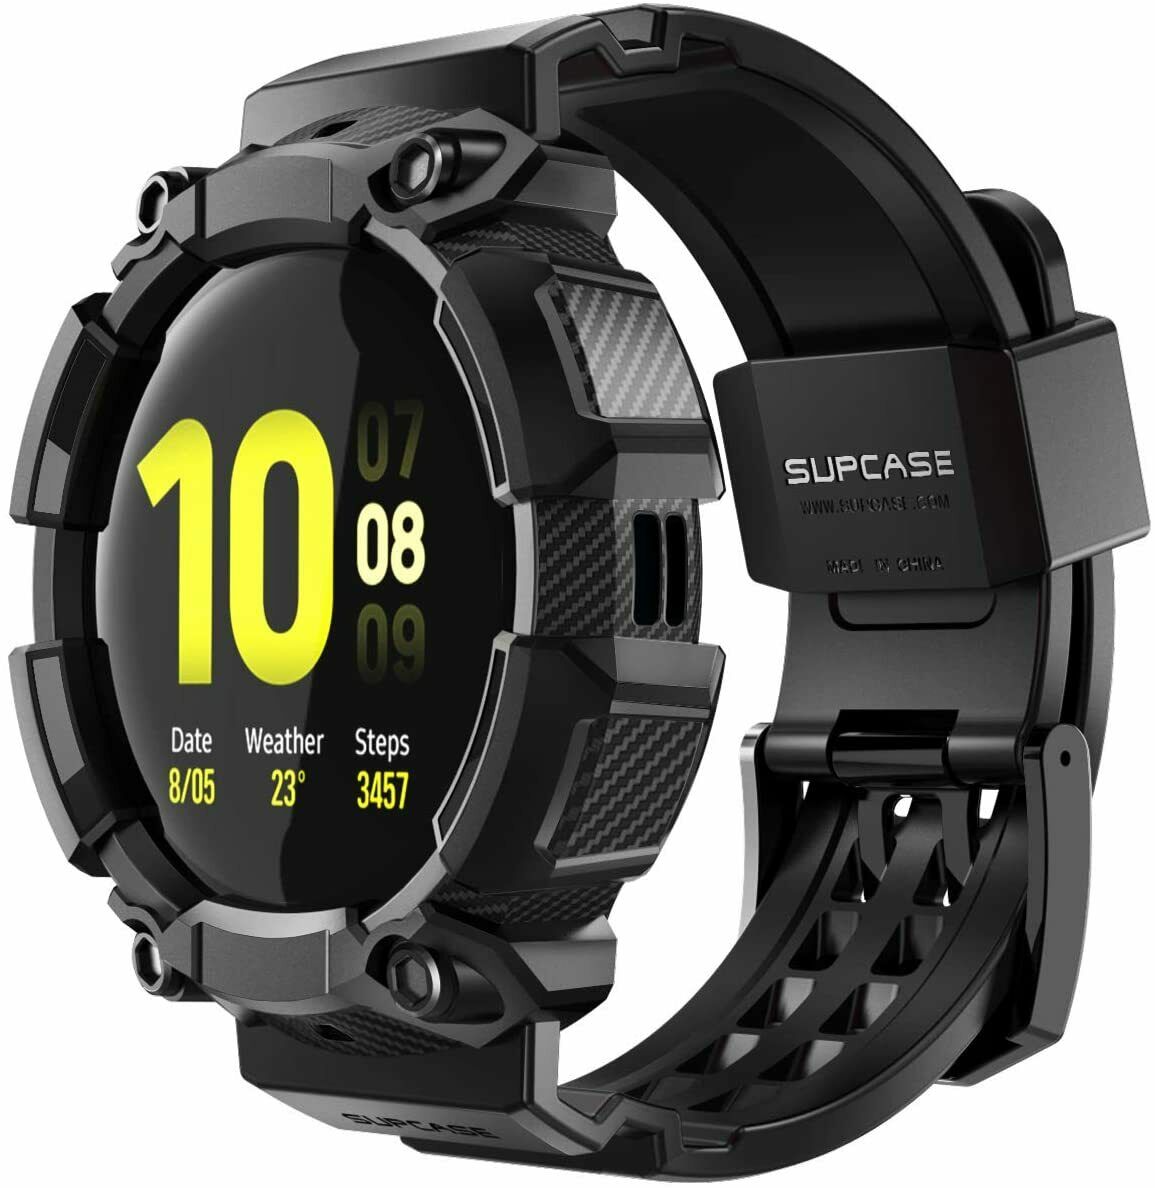 Supcase For Samsung Galaxy Watch Active 2 [44mm] Sporty Bumper Case Strap Bands